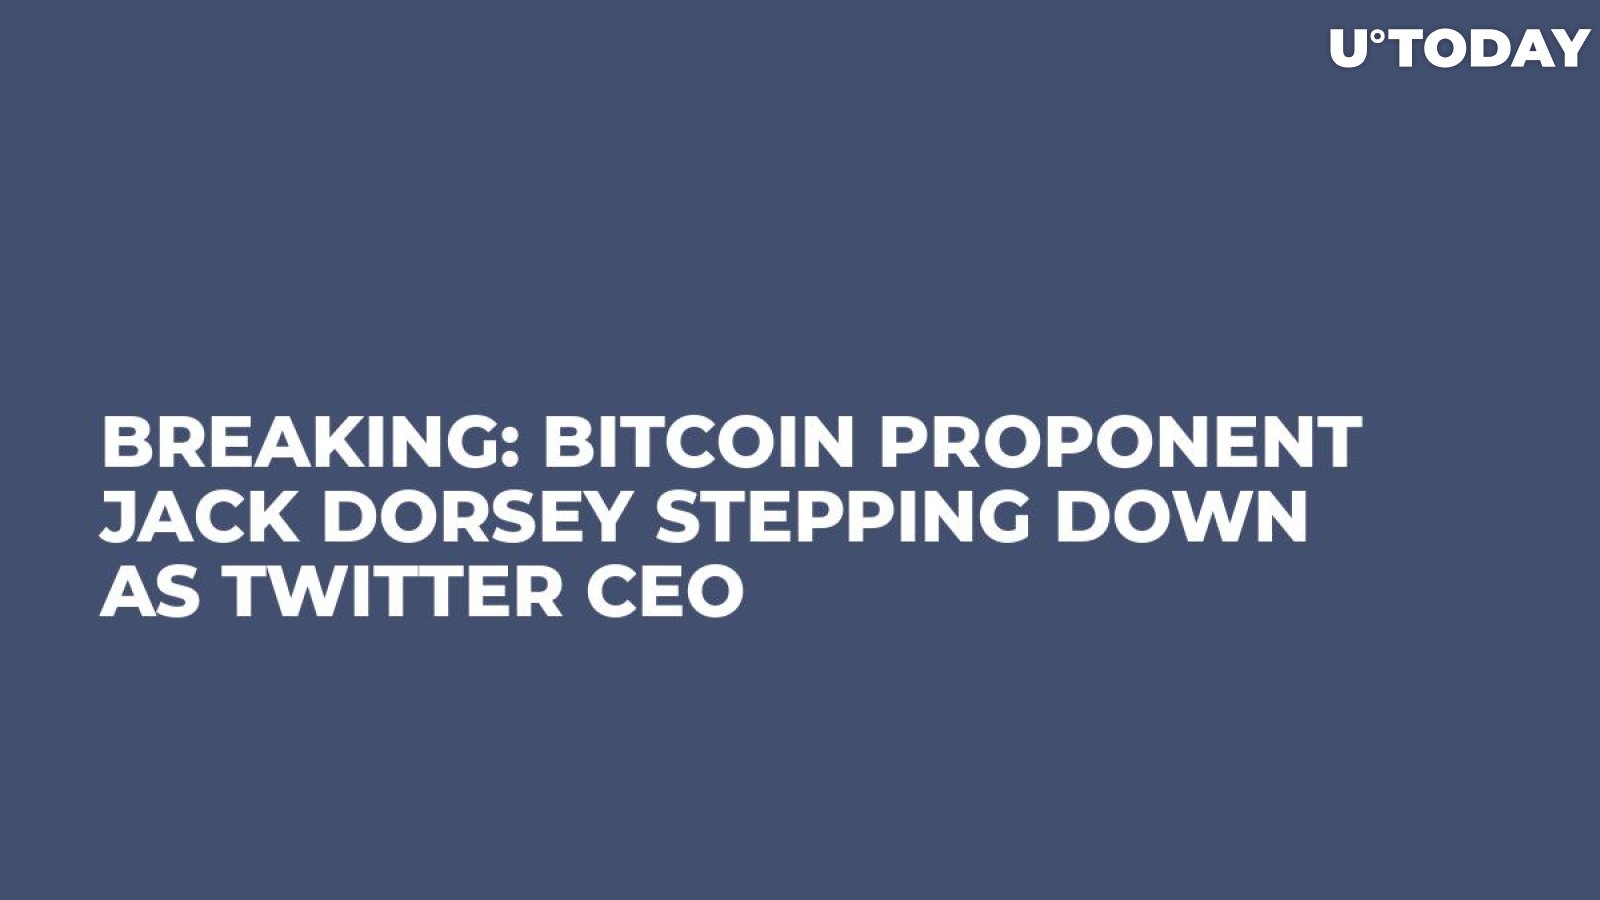 BREAKING: Bitcoin Proponent Jack Dorsey Stepping Down as Twitter CEO